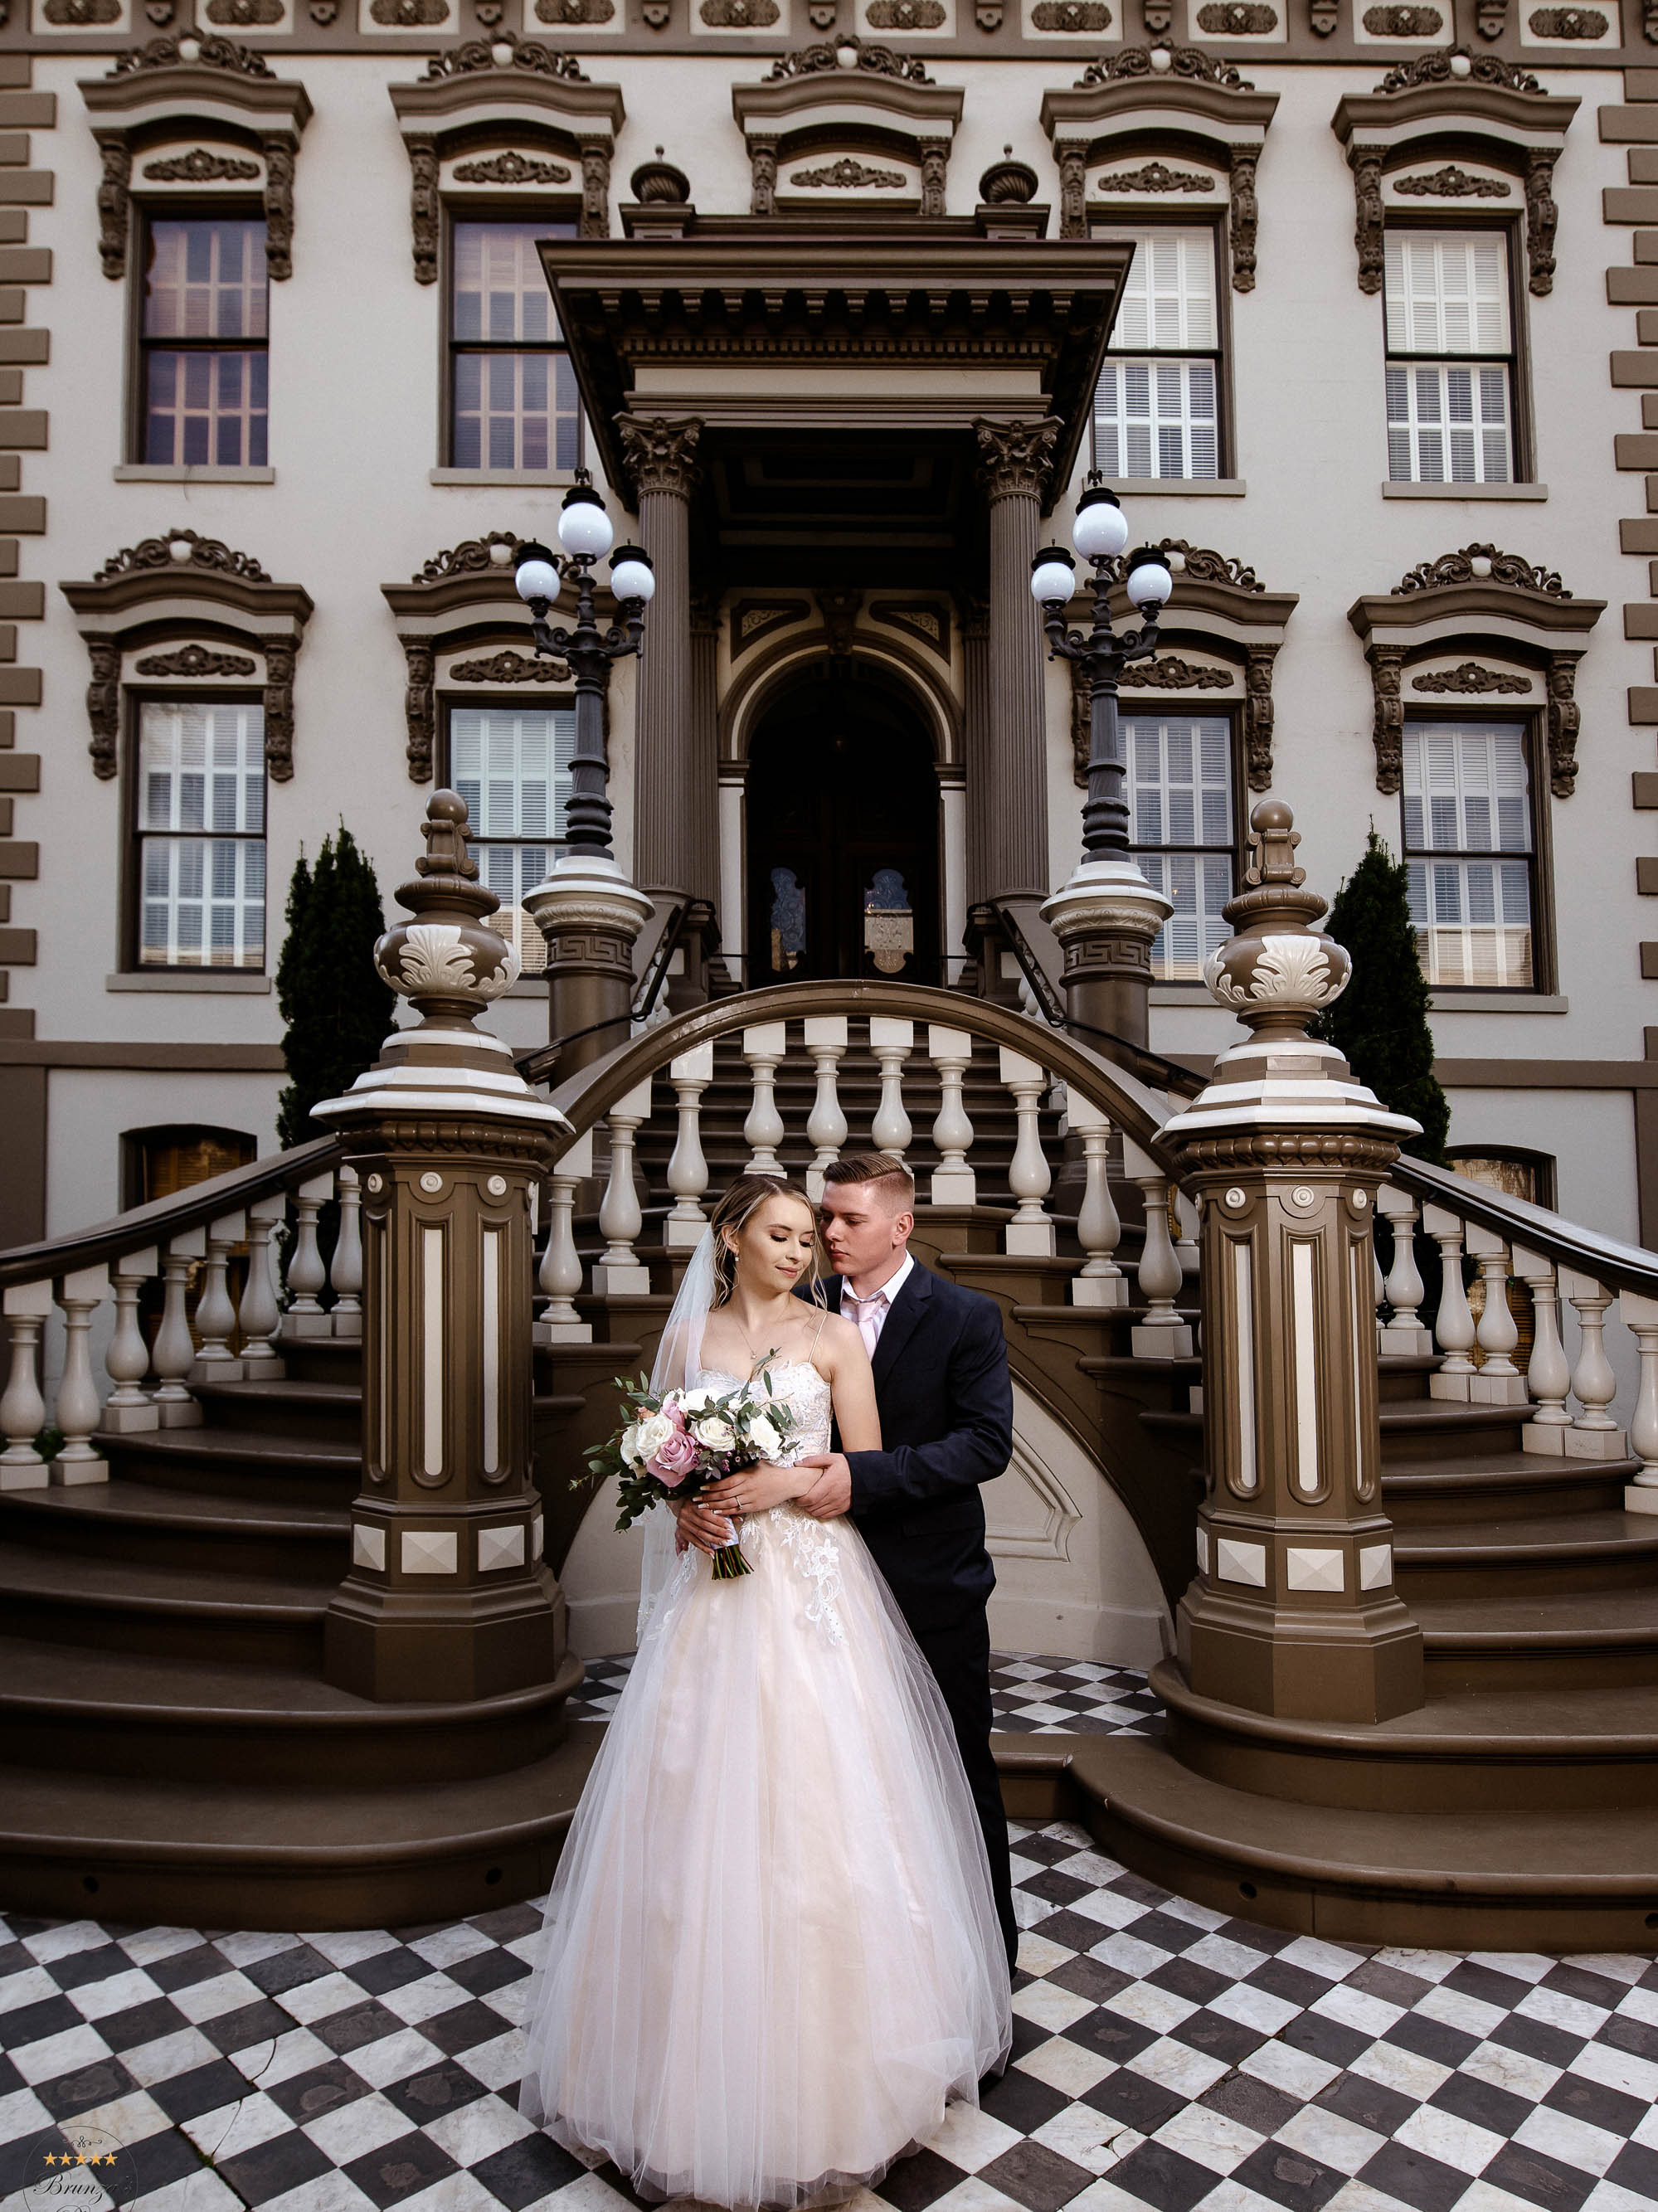 A bride and groom standing in front of an ornate mansion.